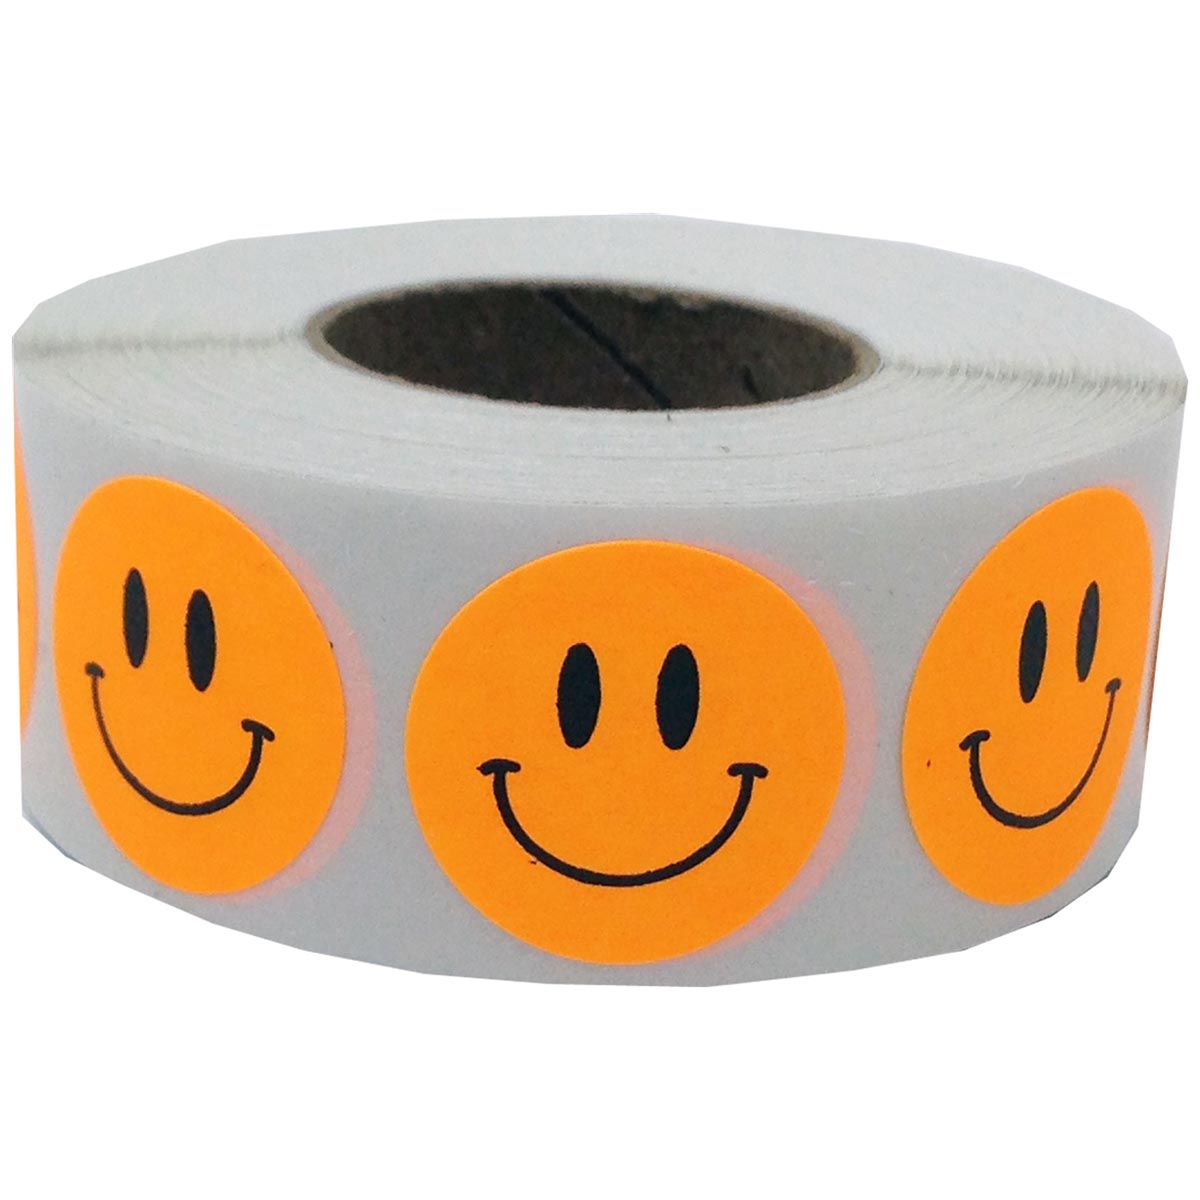 1 Yellow Smiley Face Stickers - Qty 50